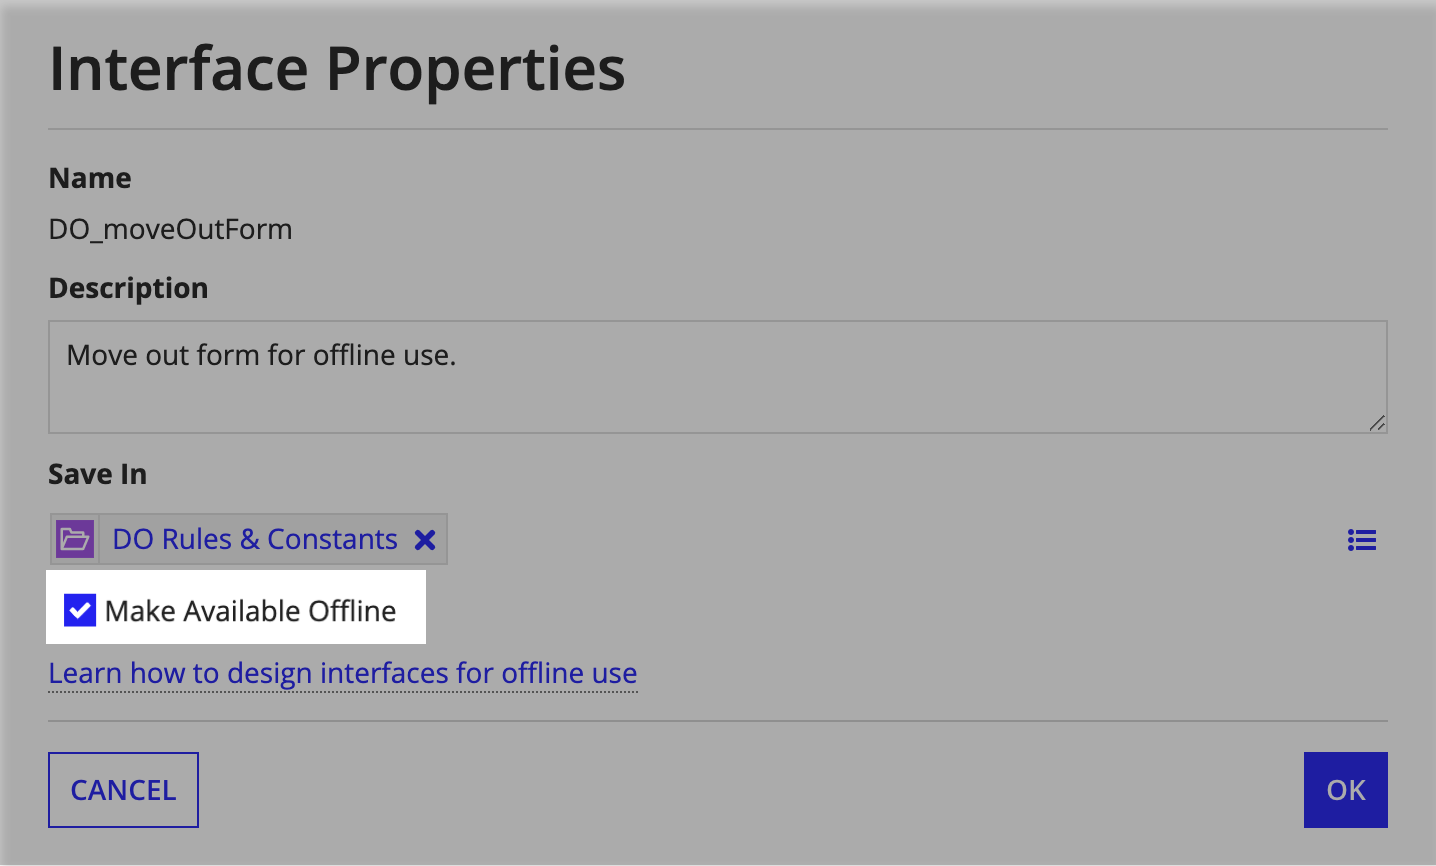 screenshot of the interface properties dialog with the "Make Available Offline" checkbox selected